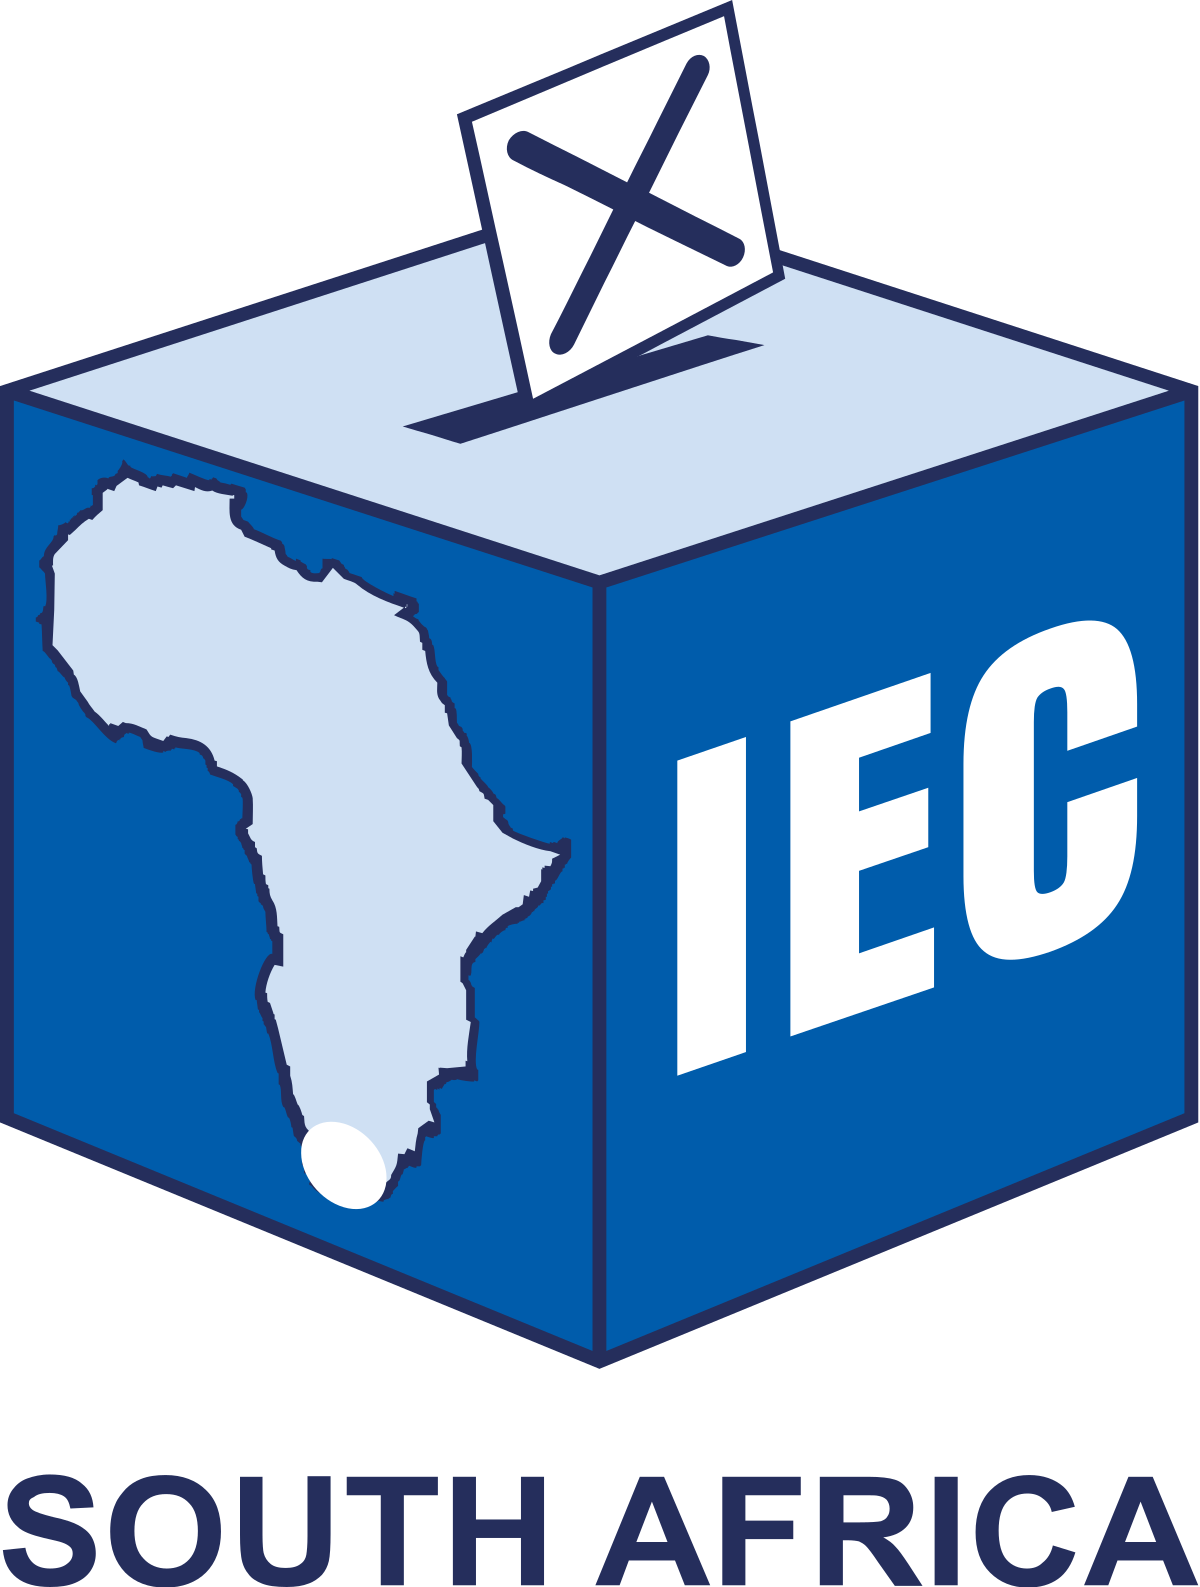 #PODCAST IEC assure the public that voting on three ballot papers will not slow down election result counting process #sabcnews